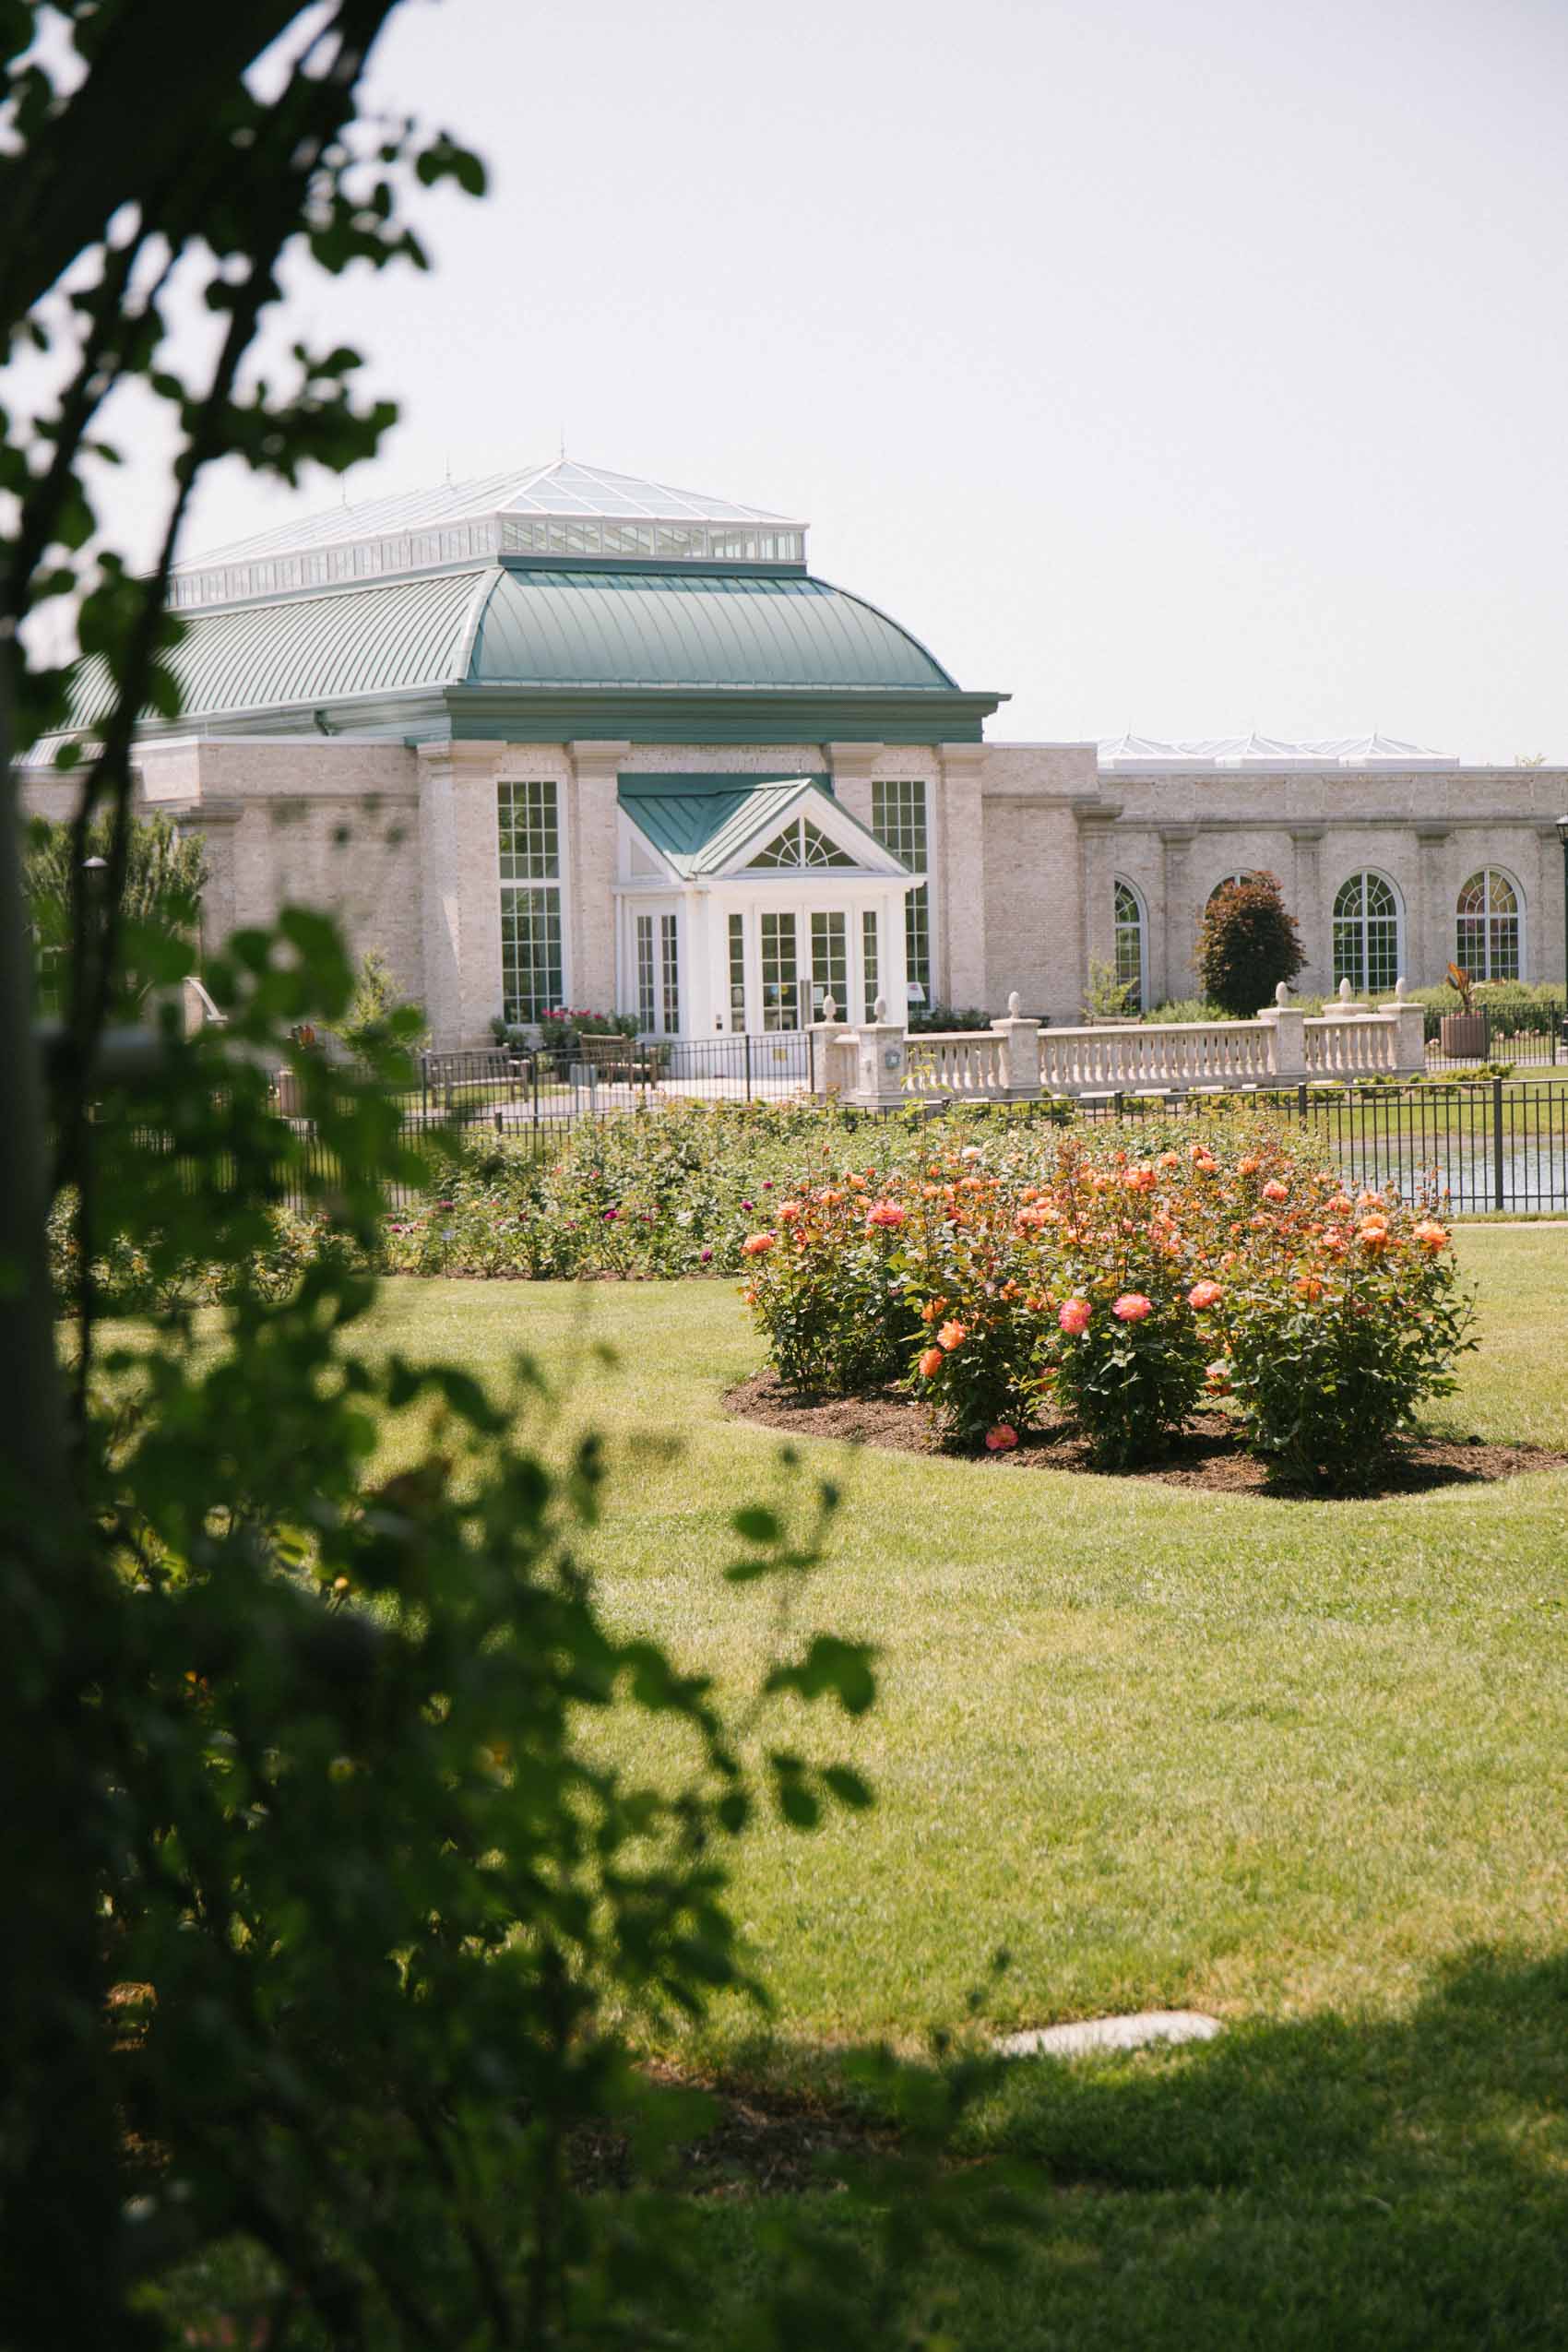 Gorgeous building surrounded by flowers at the Hershey Gardens in Pennsylvania. 